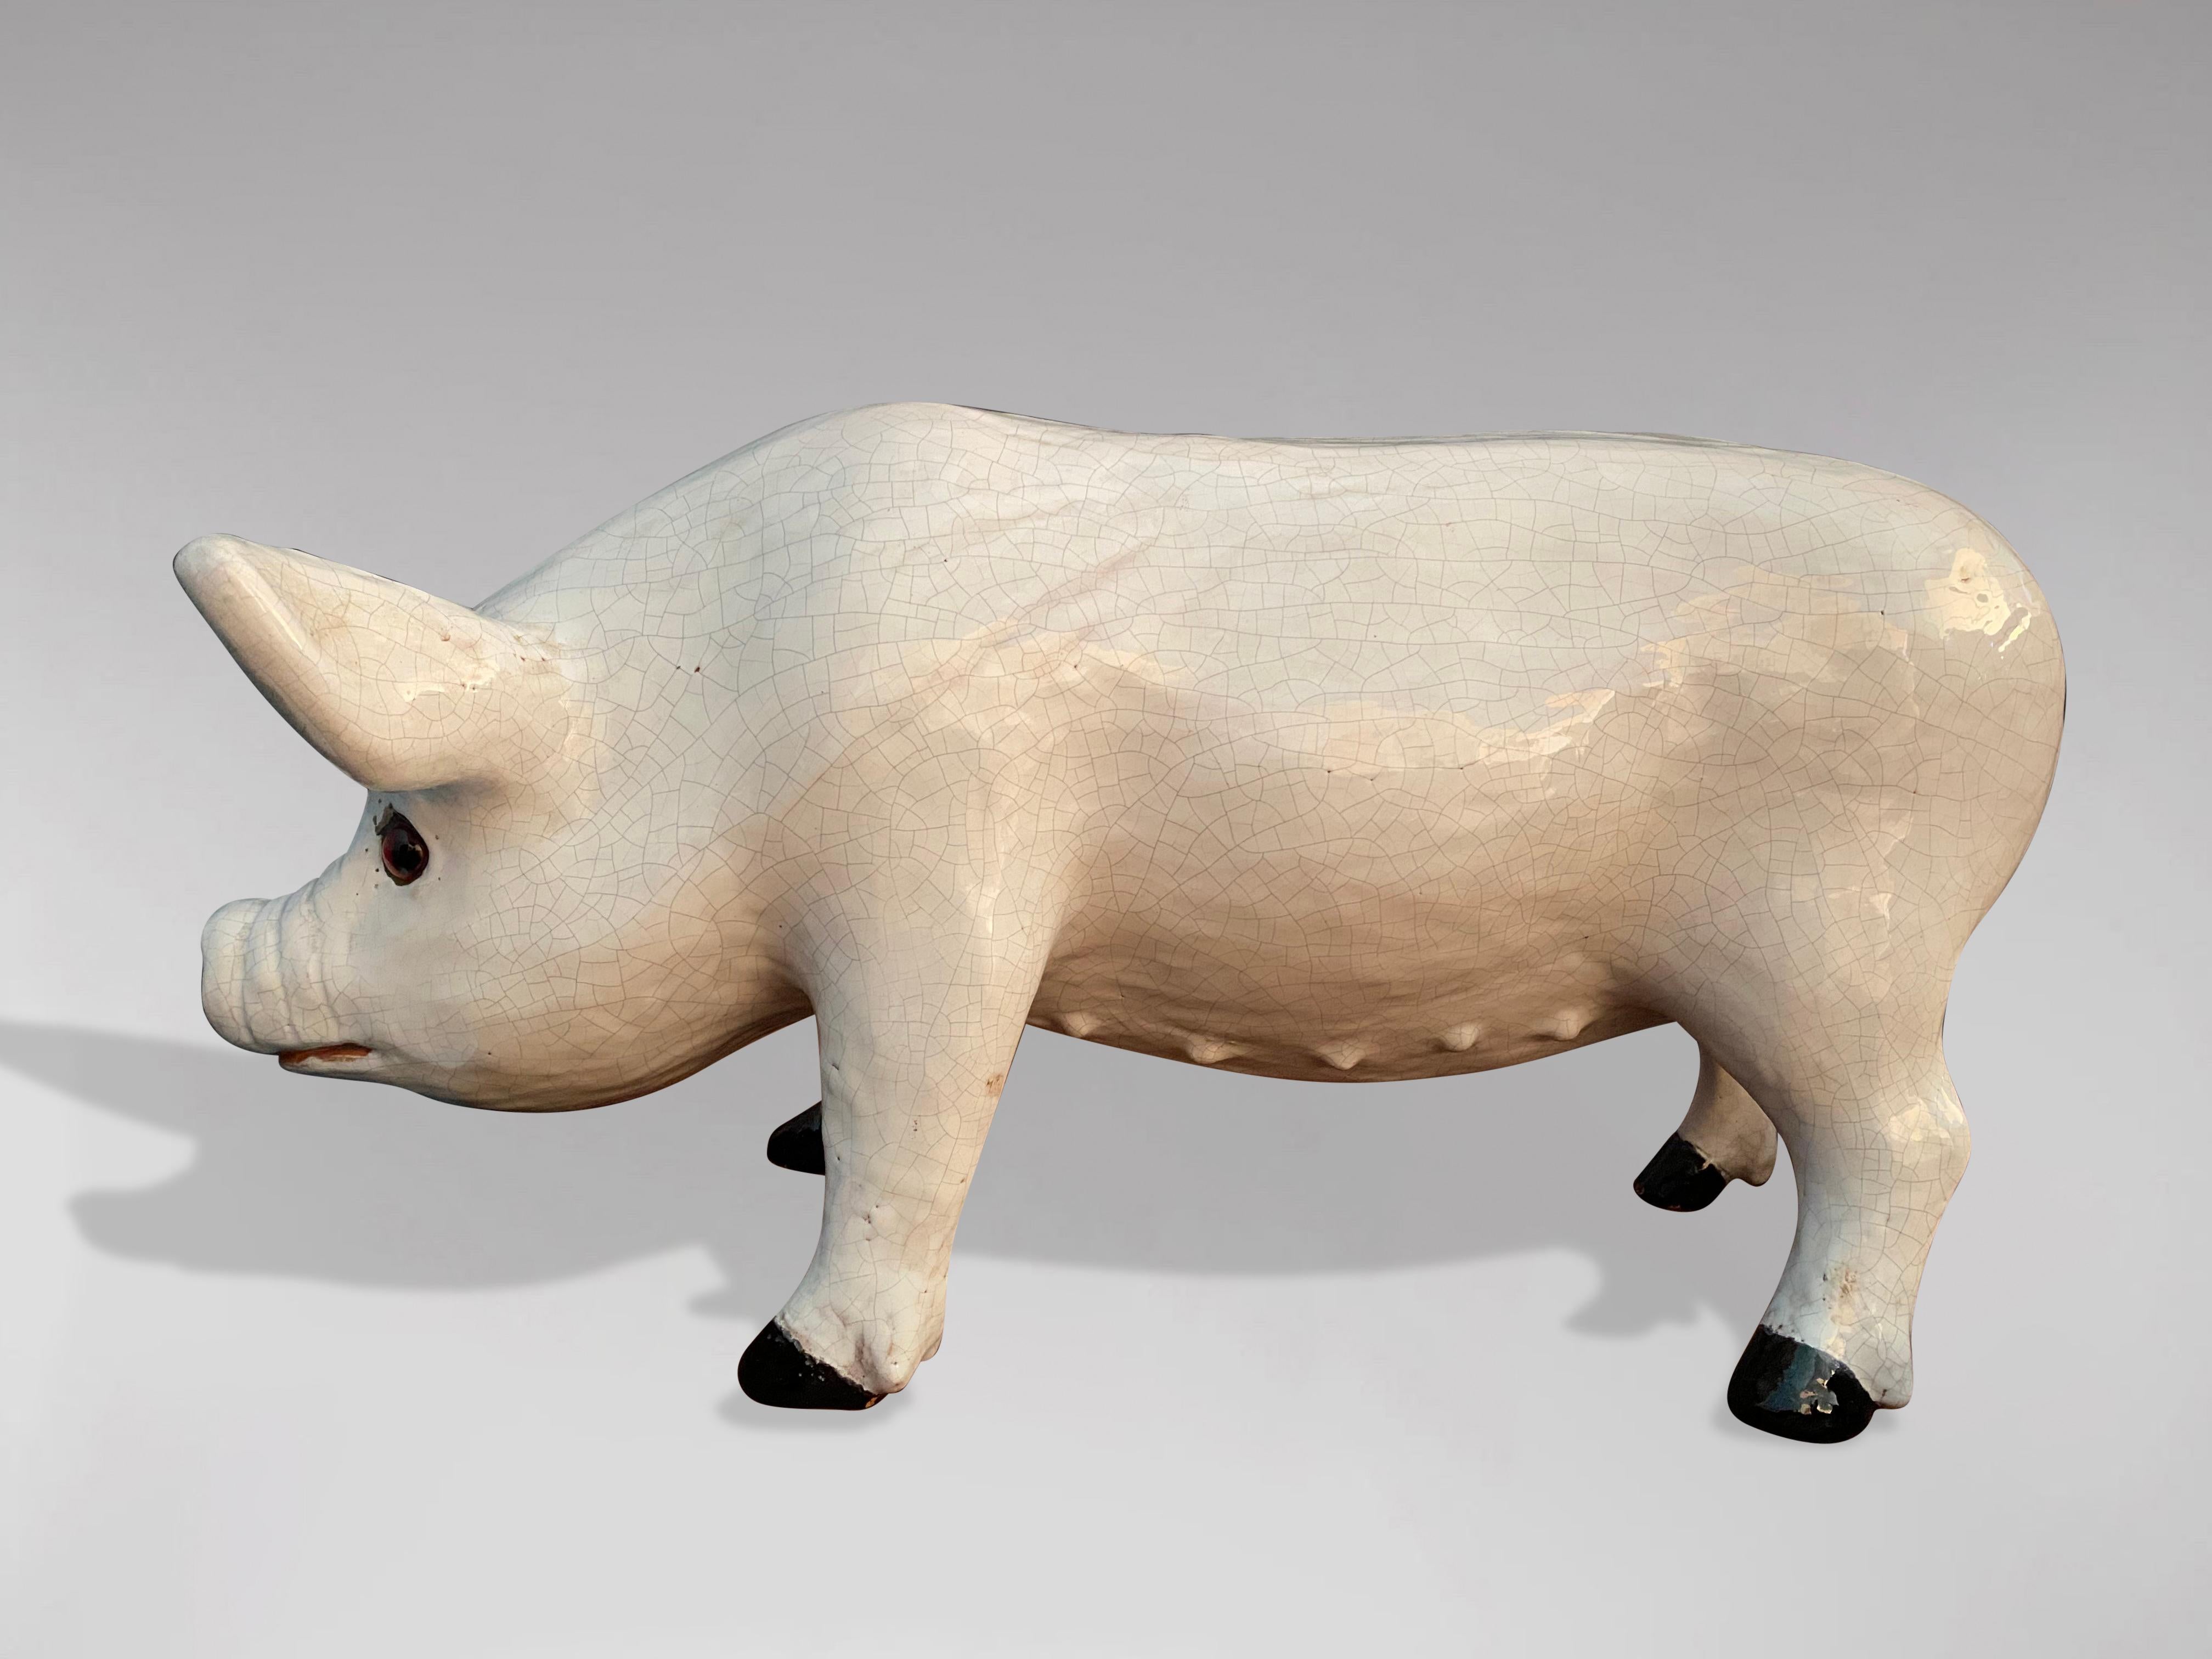 A great looking late 19th century French pig sculpture in earthenware from Bavent in Normandy. The pig of different shades of white as well as its expressive look testifies to the quality of its craftsmanship. In perfect and original condition with